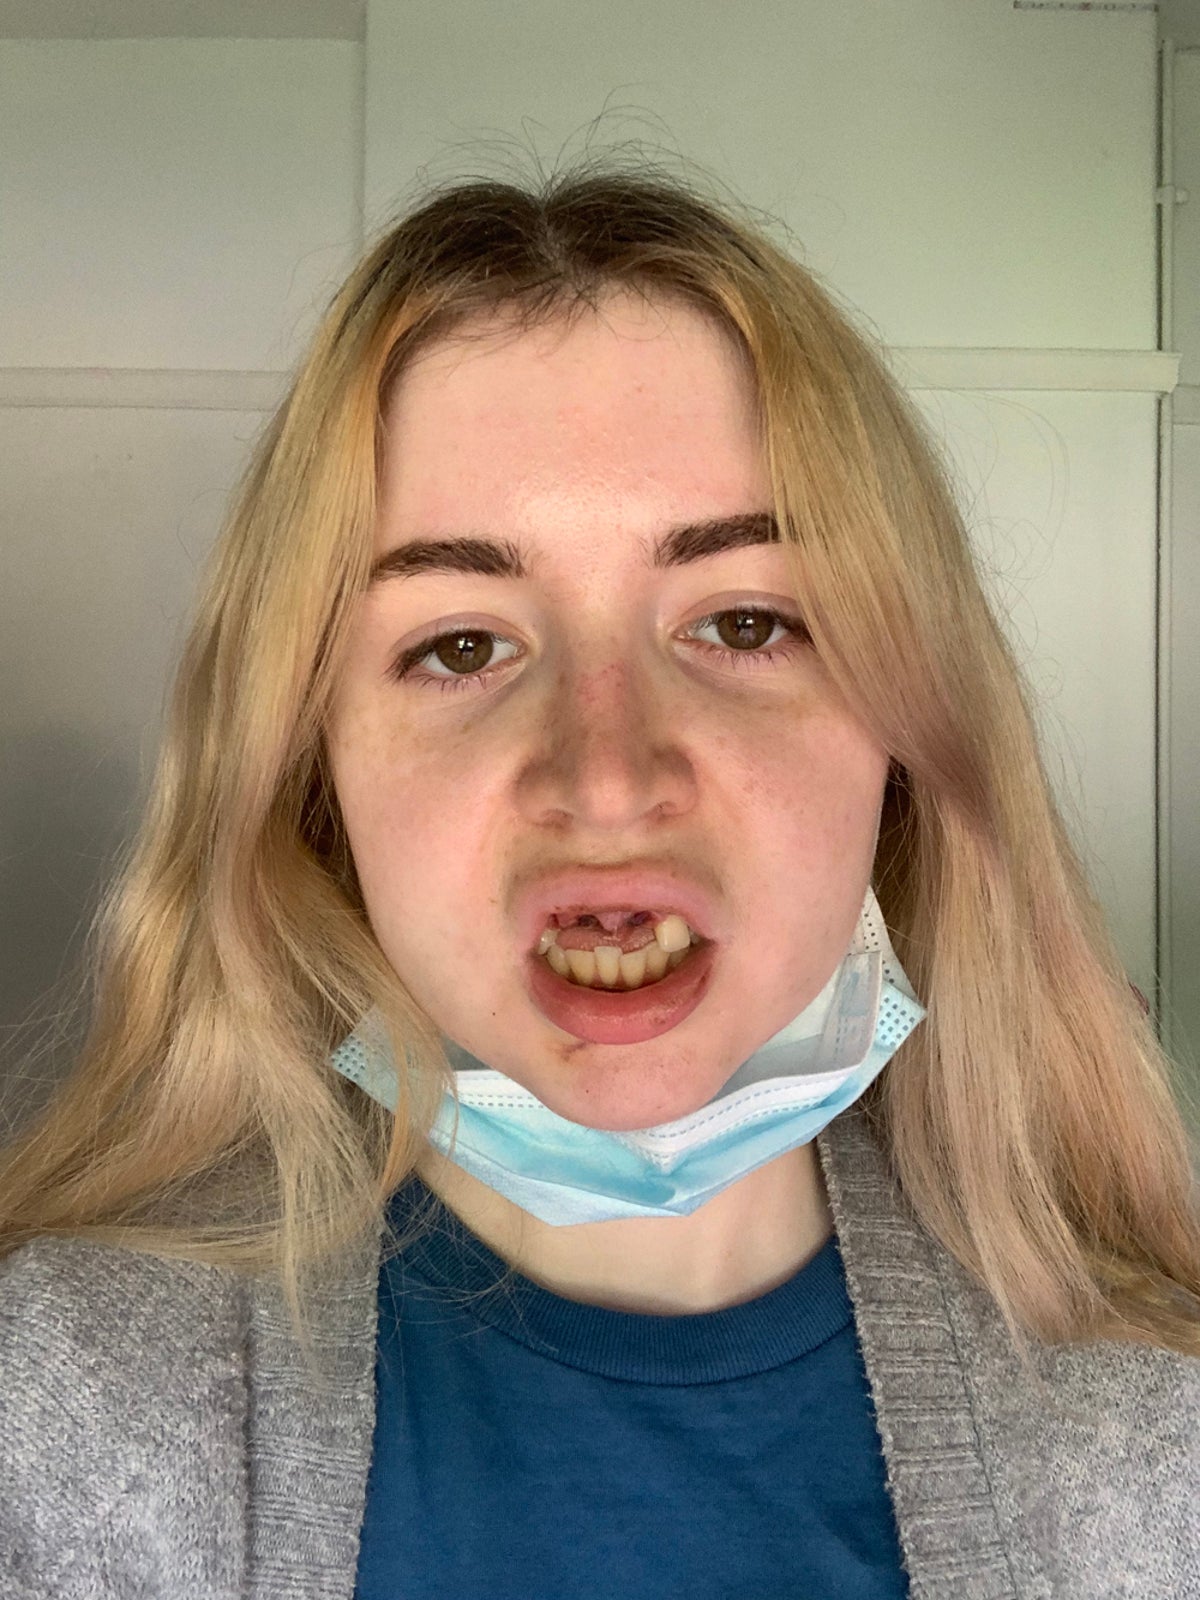 ‘An actual zombie’: Gamer begs for help after losing her teeth in freak comedy gig accident